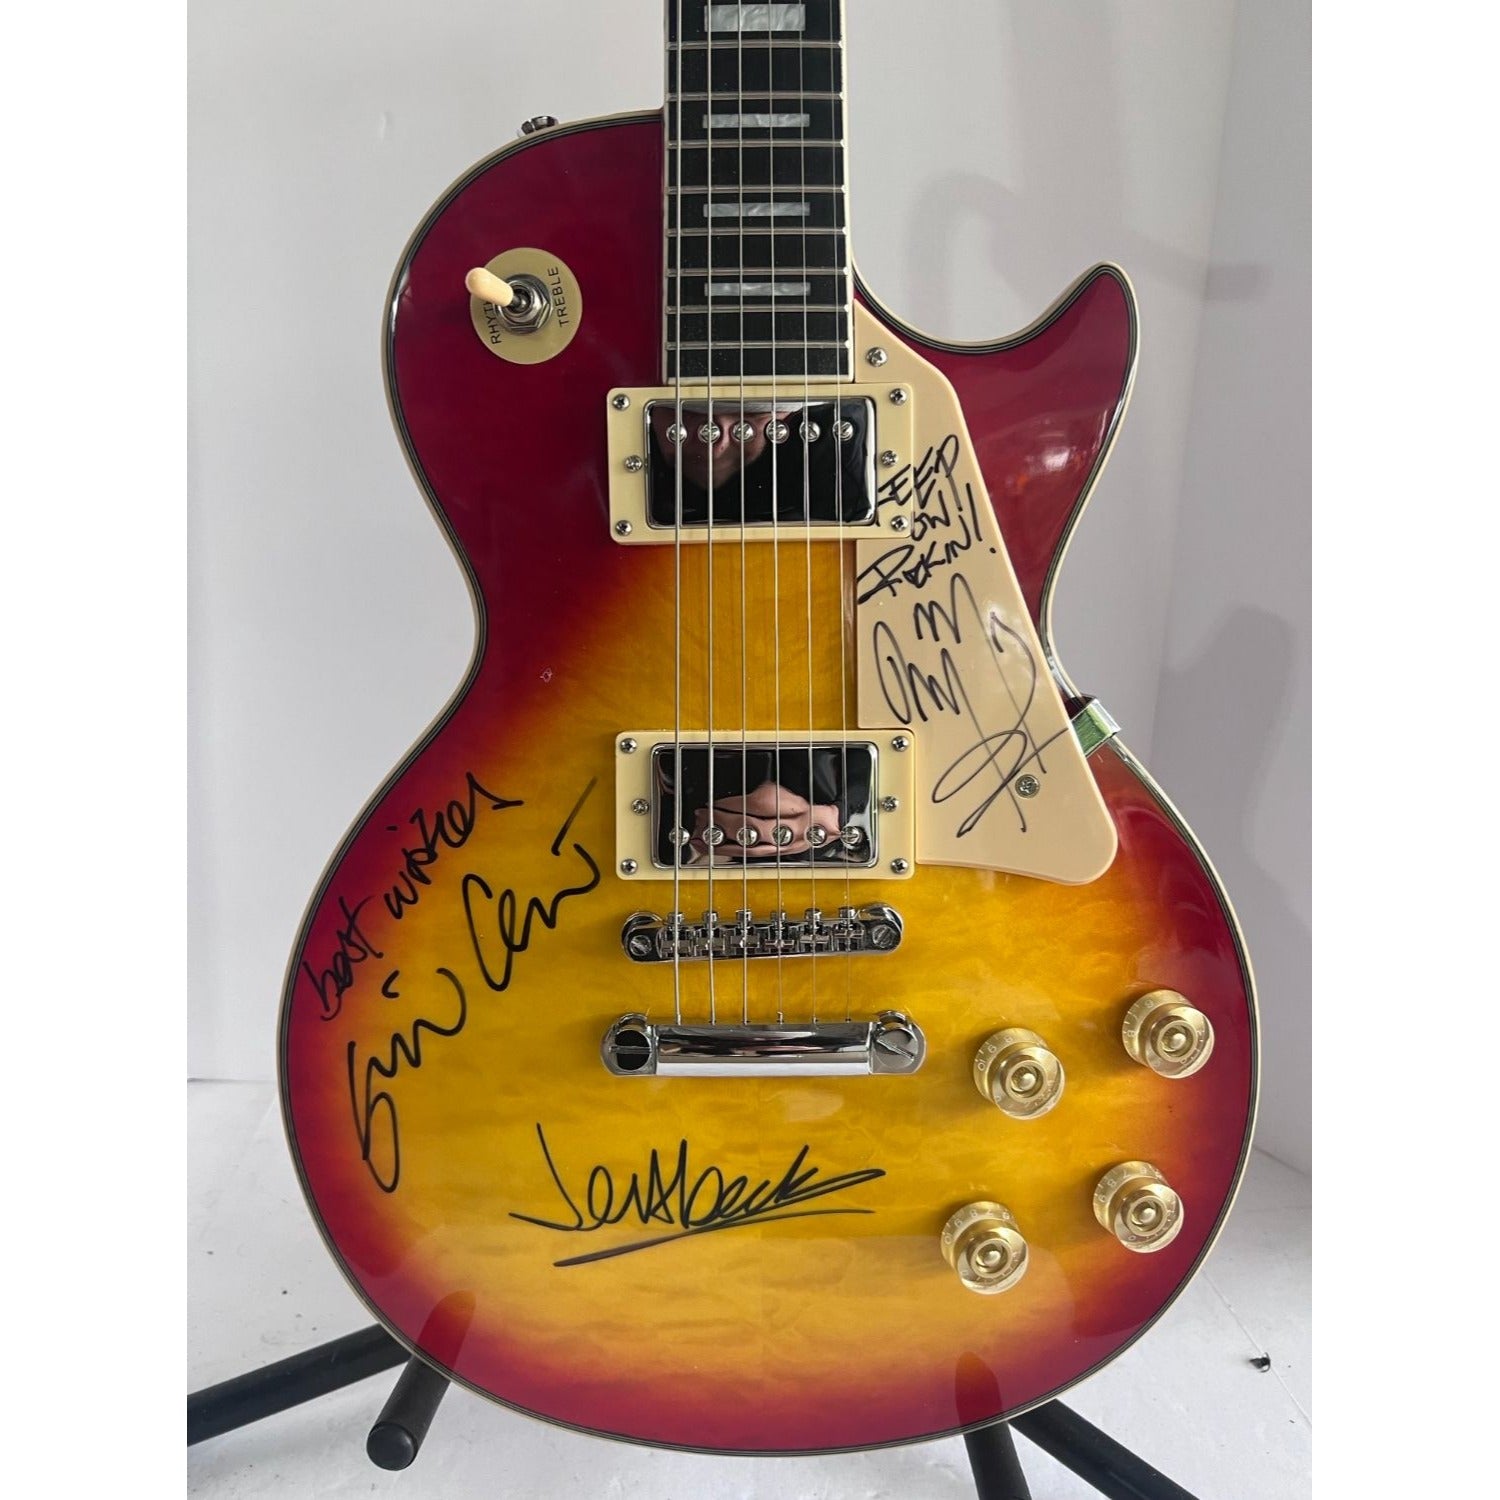 Jimmy Page Jeff Beck Eric Clapton incredible Les Paul electric guitar signed with proof